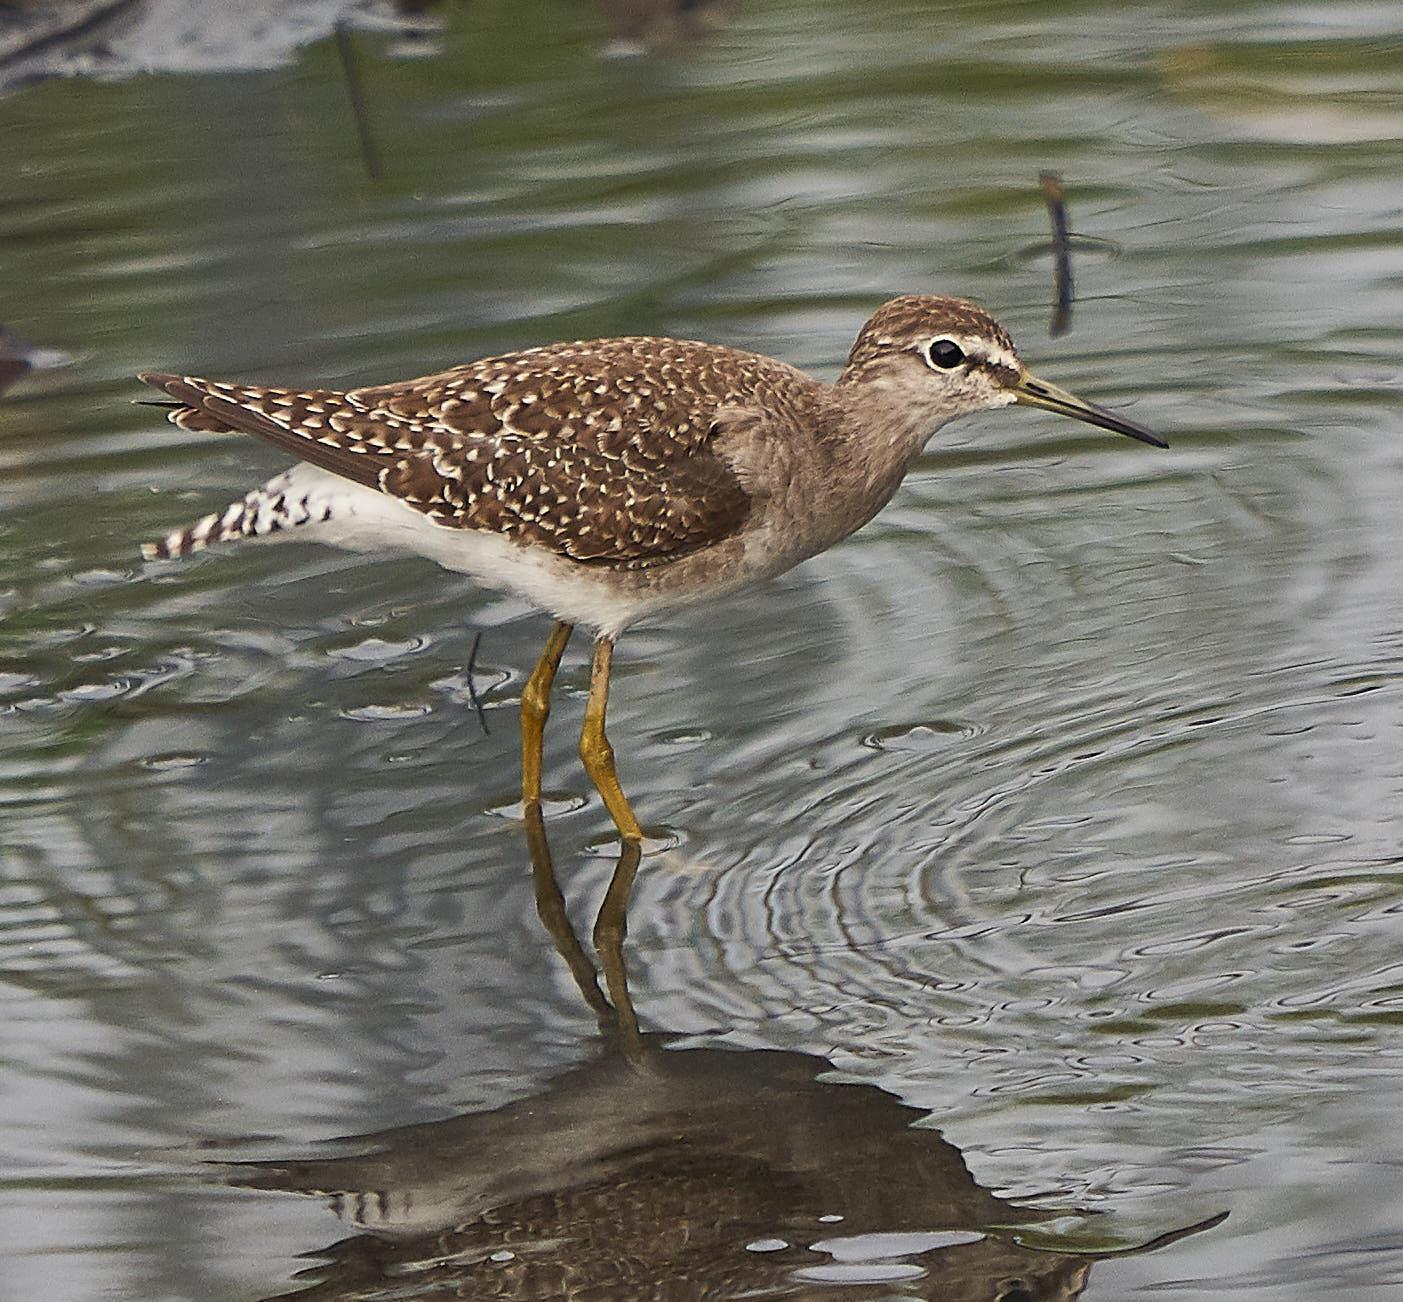 Wood Sandpiper Photo by Steven Cheong